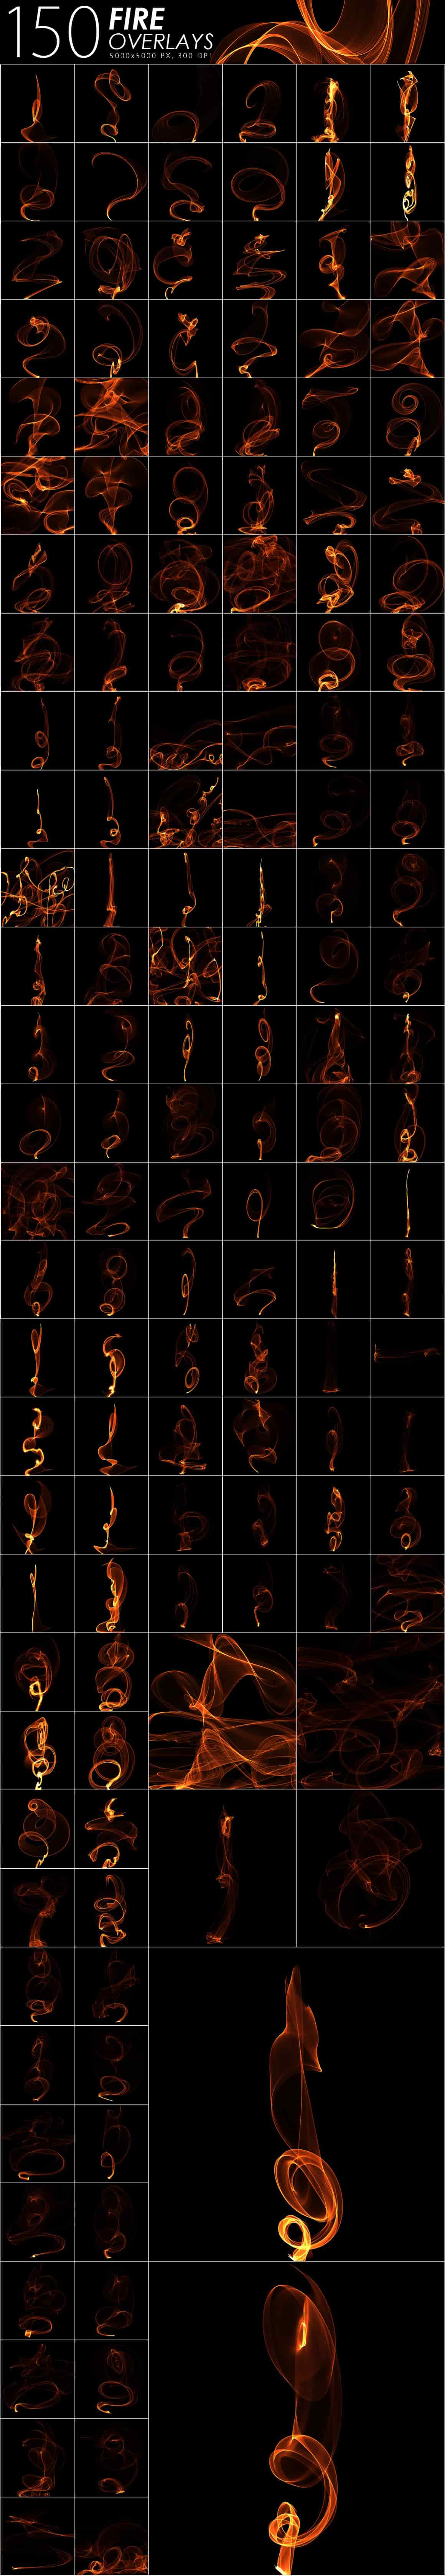 Various abstract shapes in the form of fire.